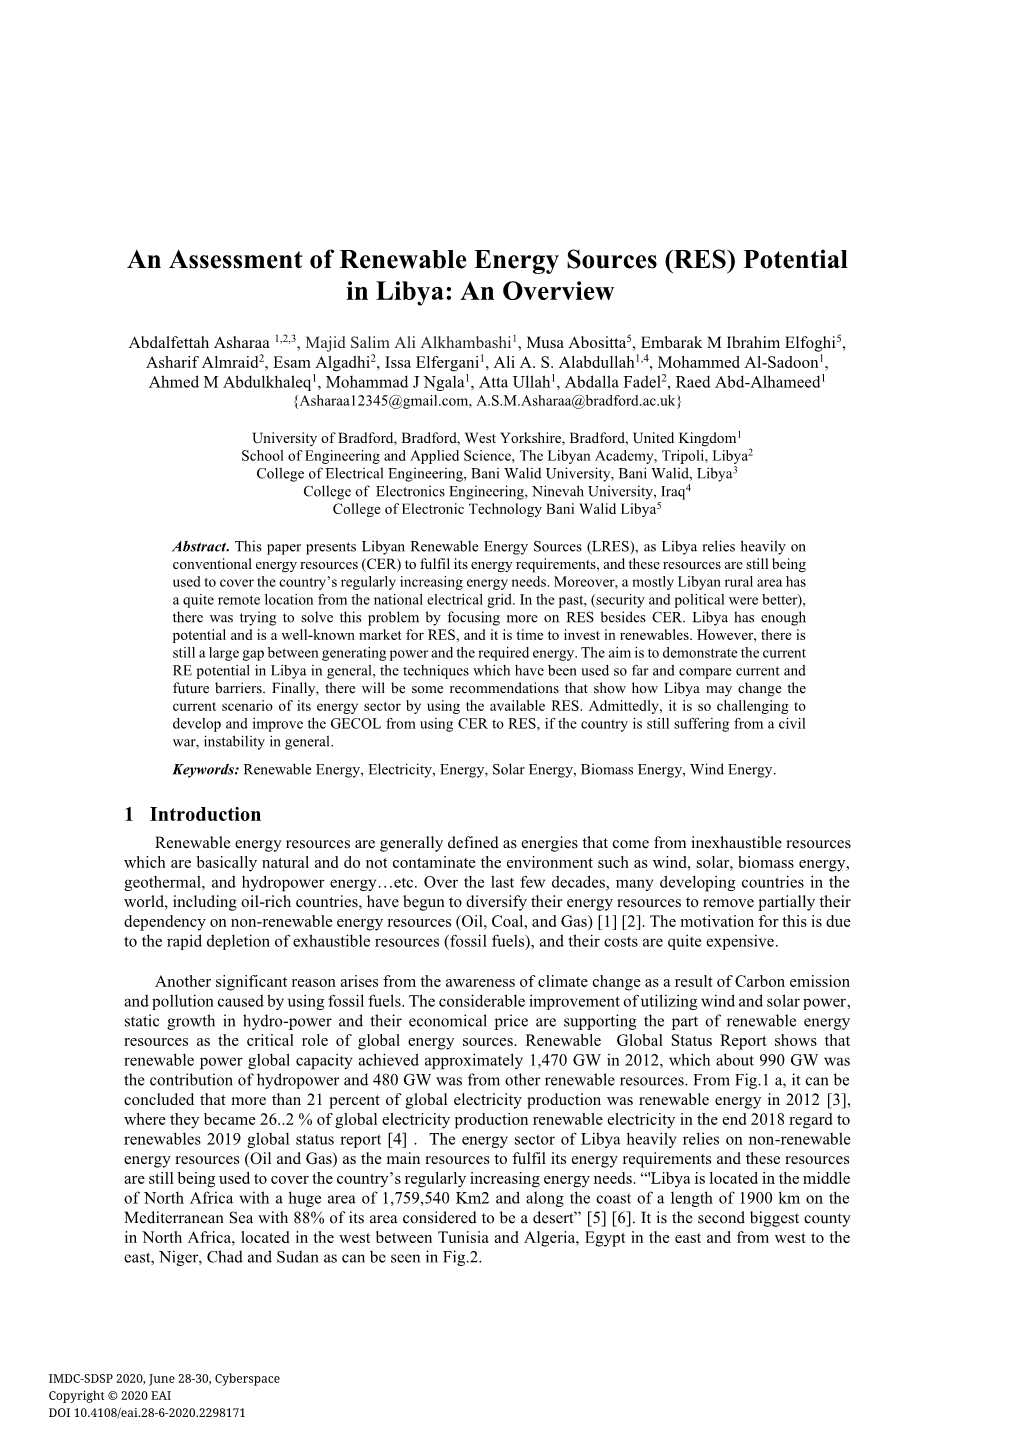 An Assessment of Renewable Energy Sources (RES) Potential in Libya: an Overview”